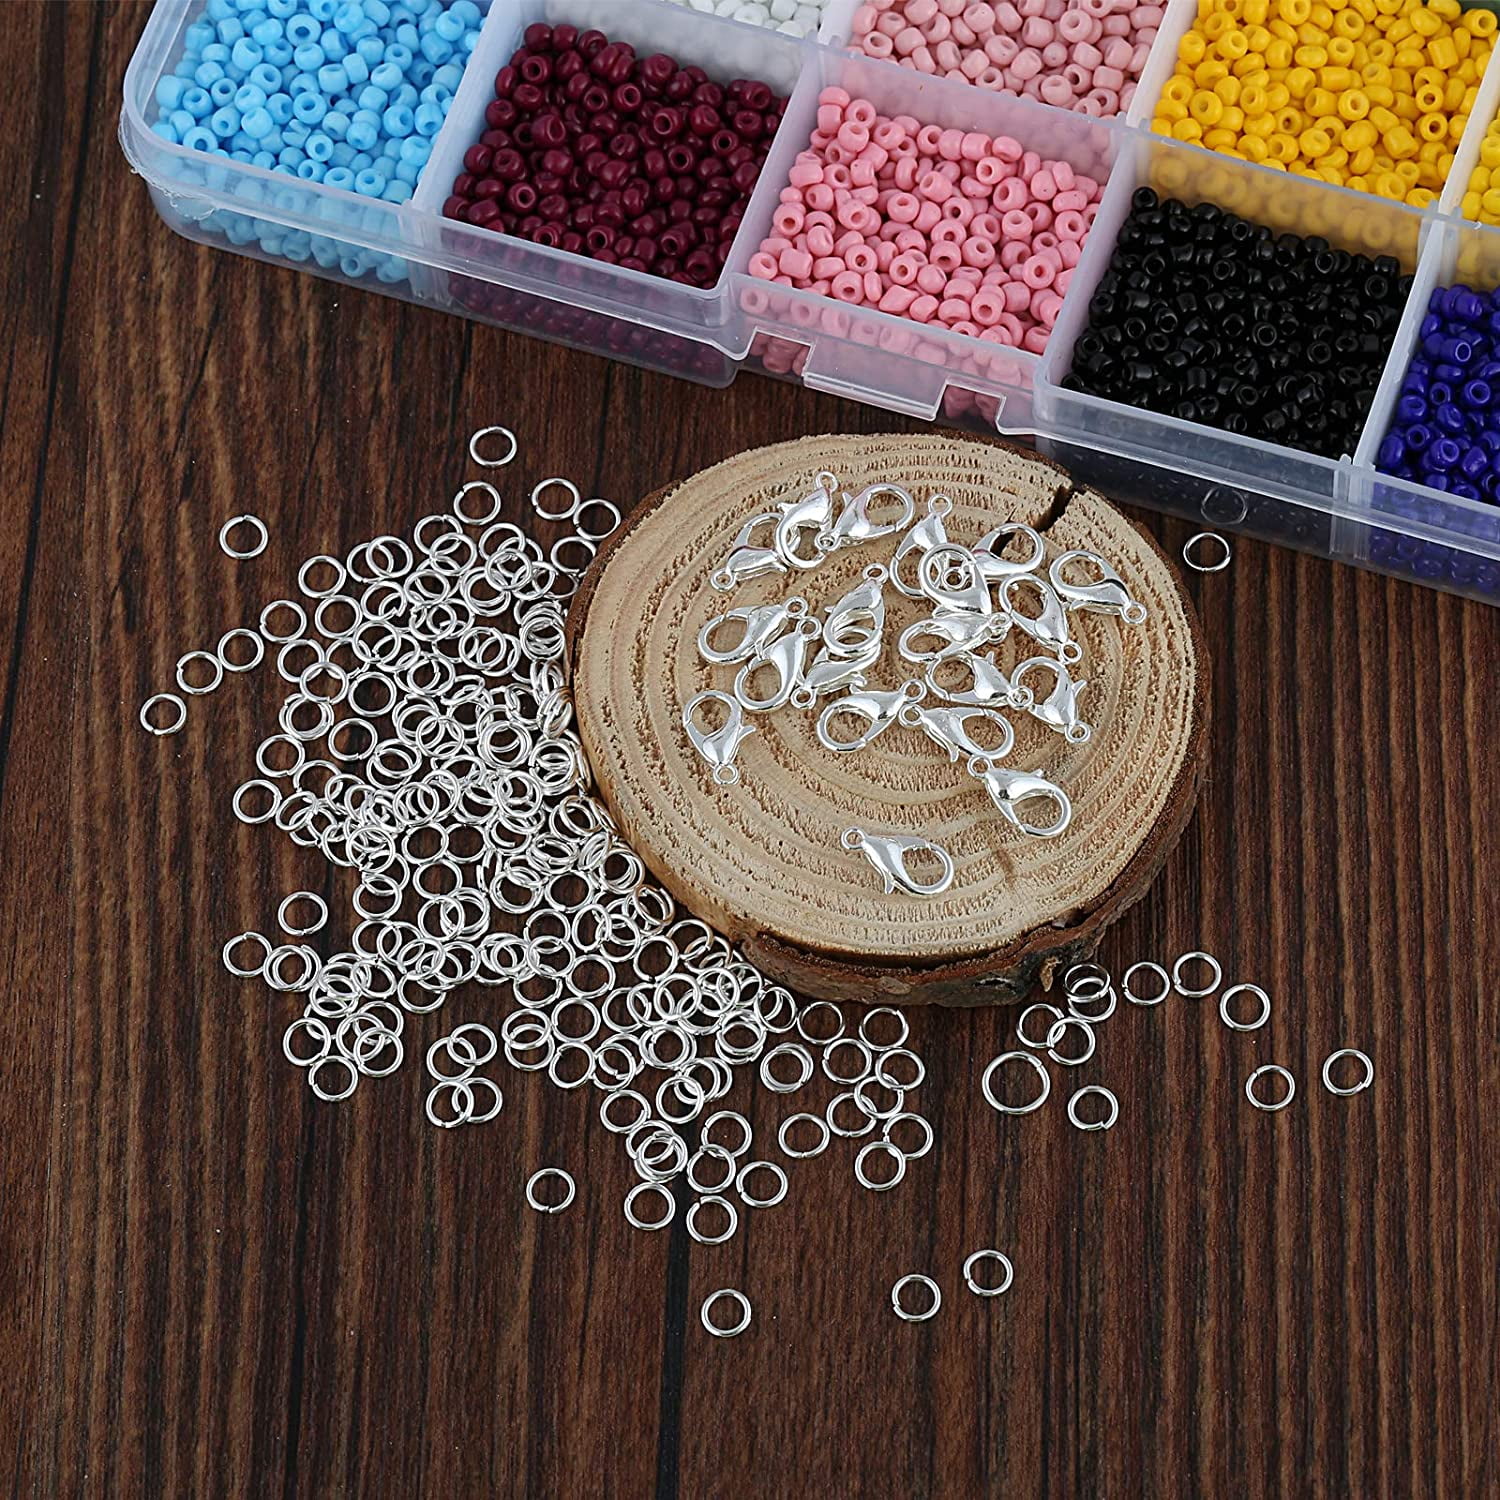  Souarts 3600Pcs Seed Beads for Jewelry Making Kit